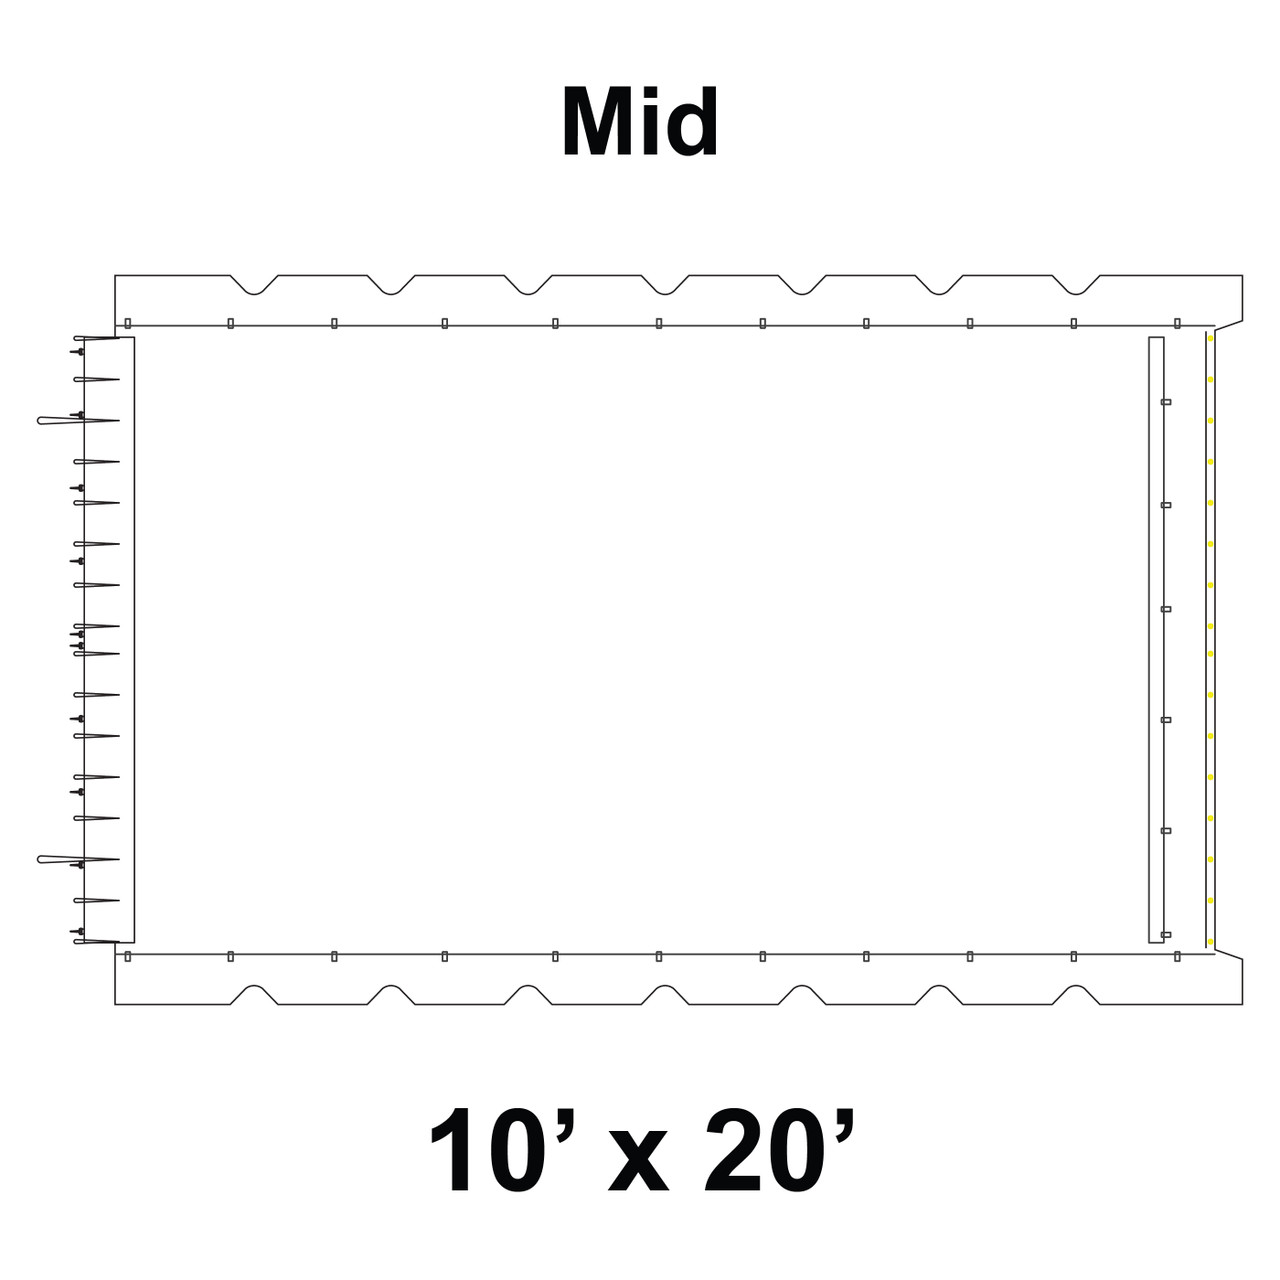 10' x 20' Classic Gable Frame Tent Top, Mid Section